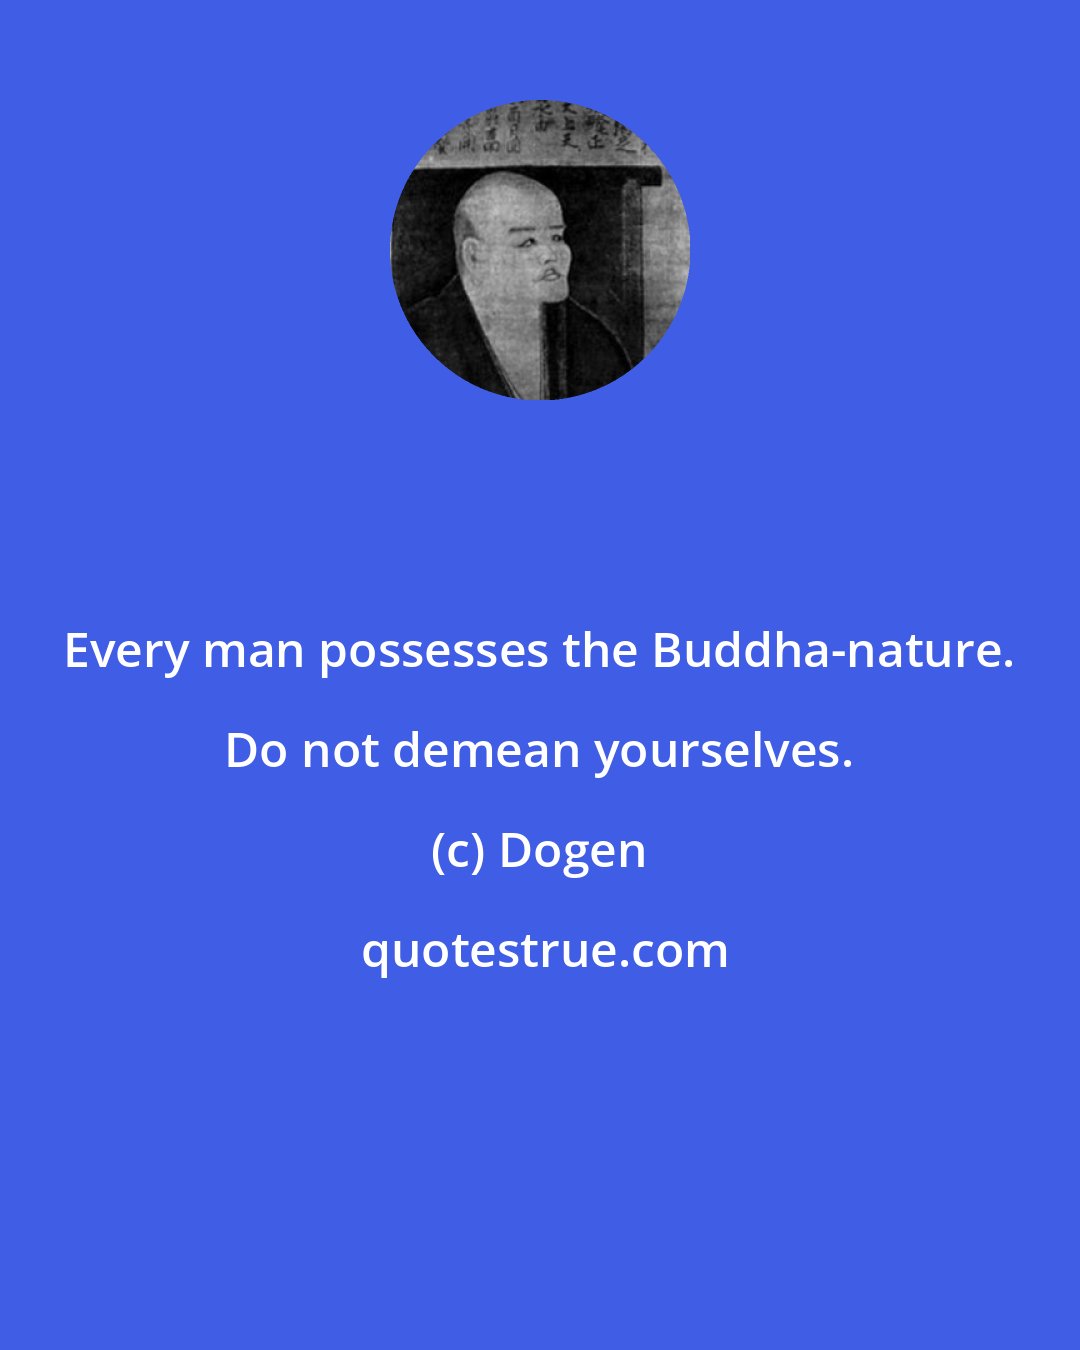 Dogen: Every man possesses the Buddha-nature. Do not demean yourselves.